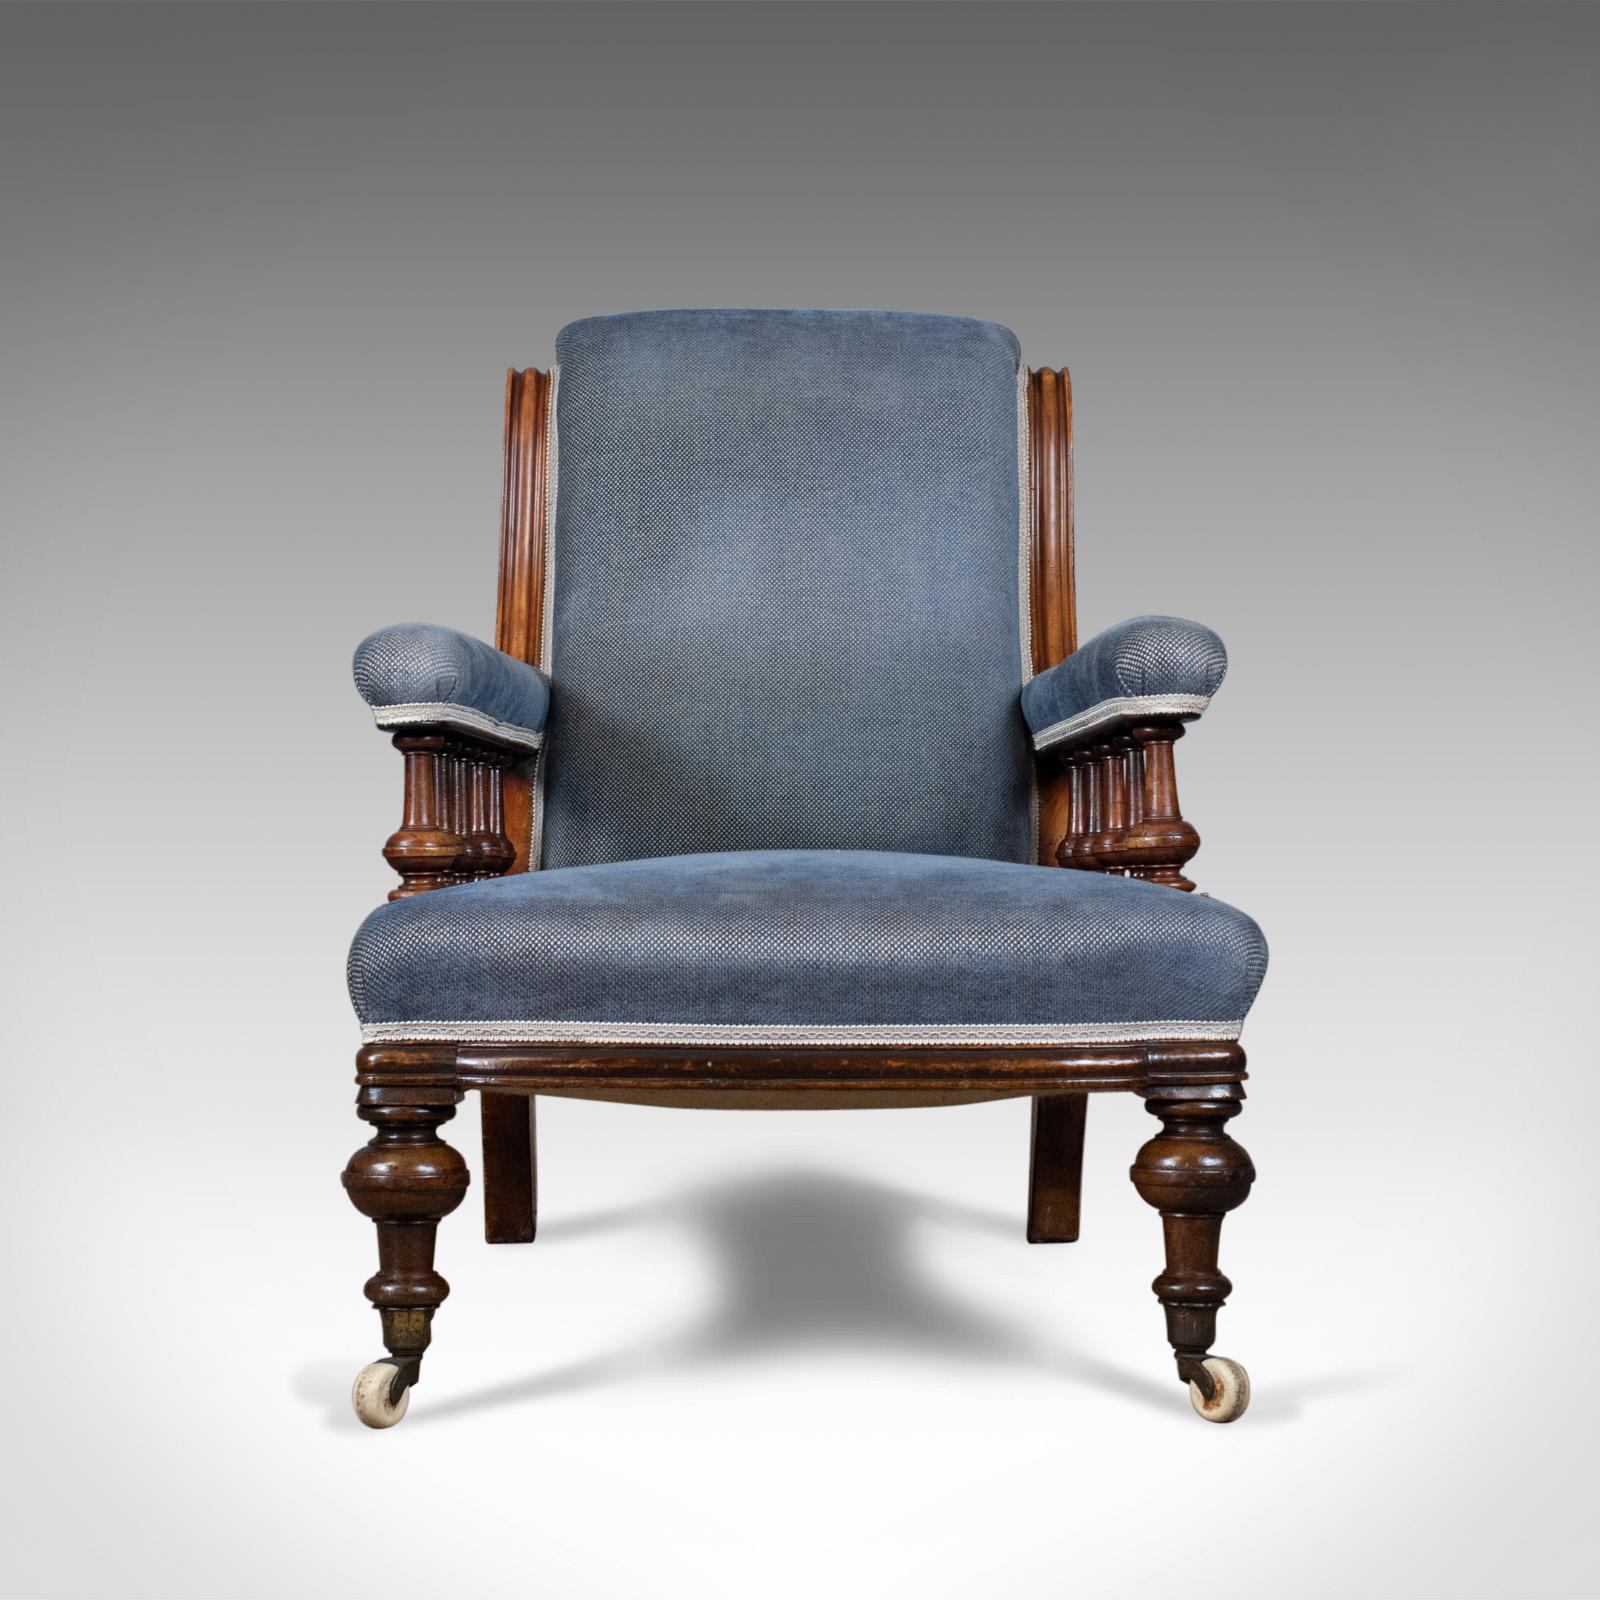 This is an antique armchair, an English, Victorian, club chair, walnut with blue upholstery, dating to the late 19th century, circa 1880.

Walnut framed offering a comfortable, deep seat
Raised on turned legs to the front and swept square section